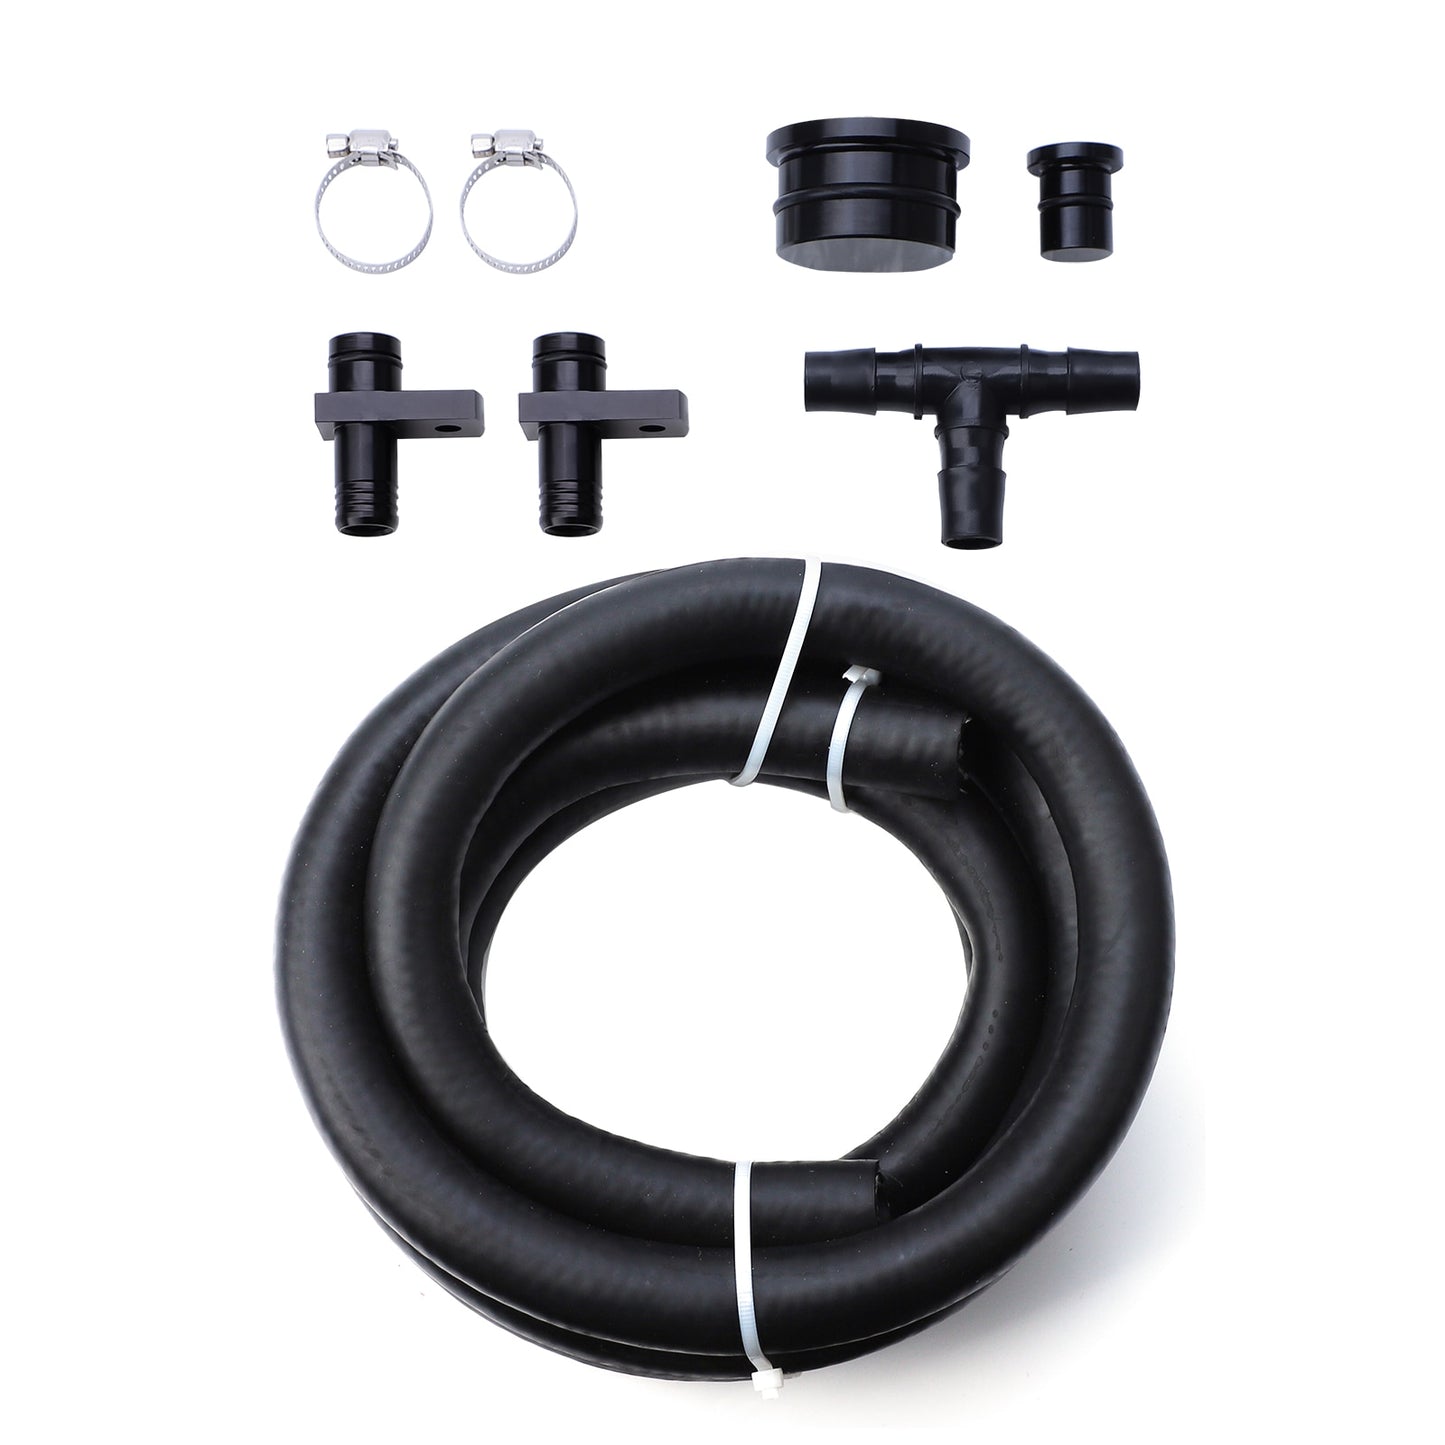 PDP PCV Reroute Kit With Resonator Plug For 04.5-10 GM 6.6 6.6L Duramax LLY LBZ LMM